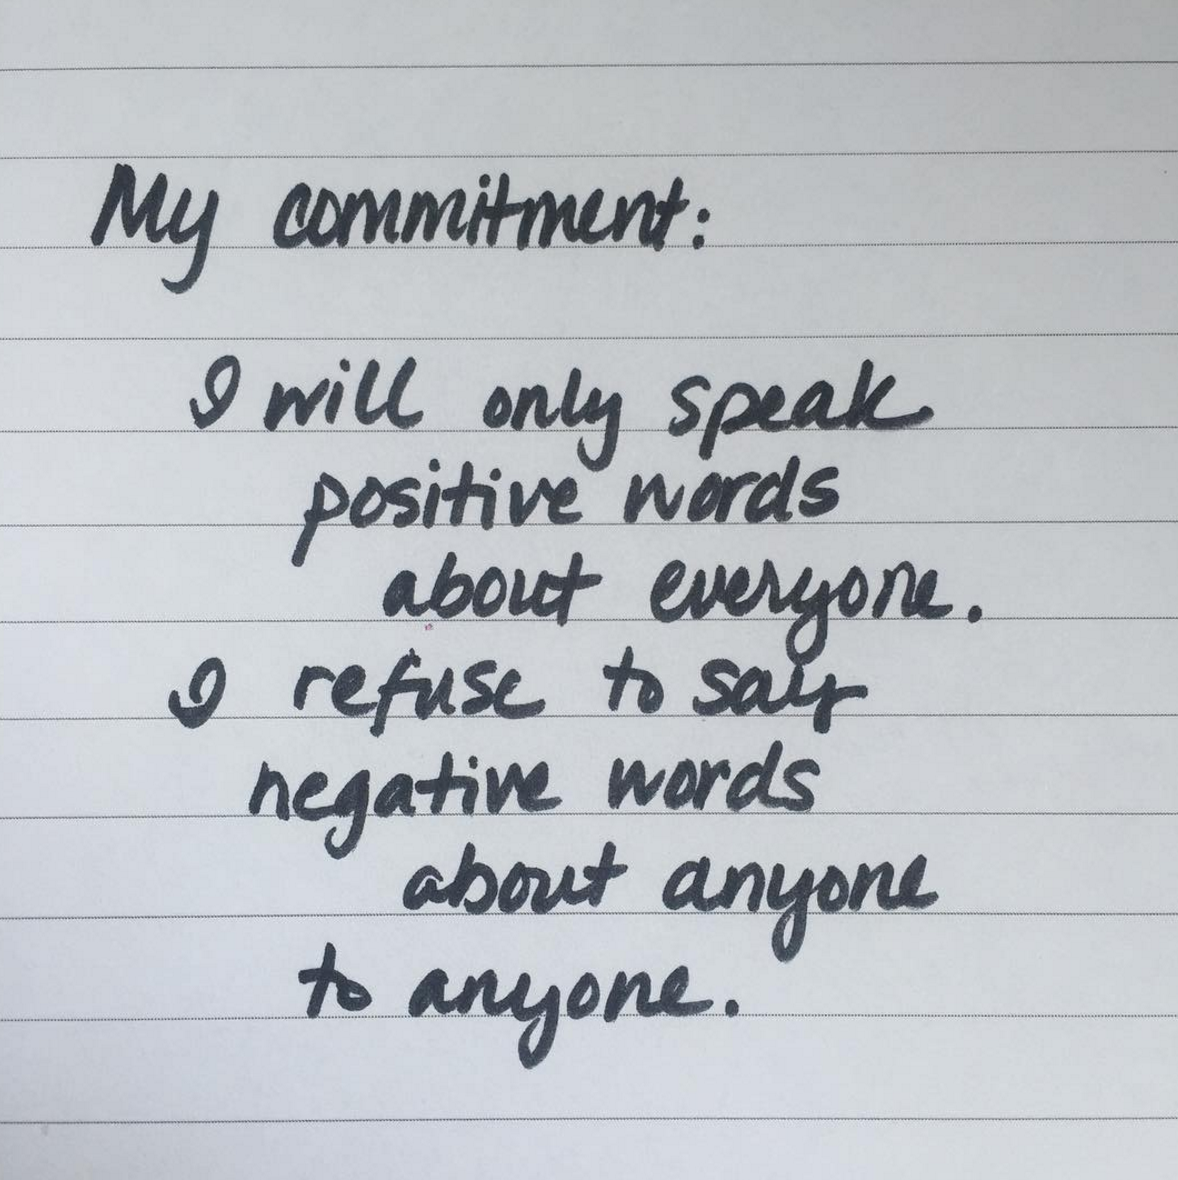 I will not speak any negative words about anyone to anyone